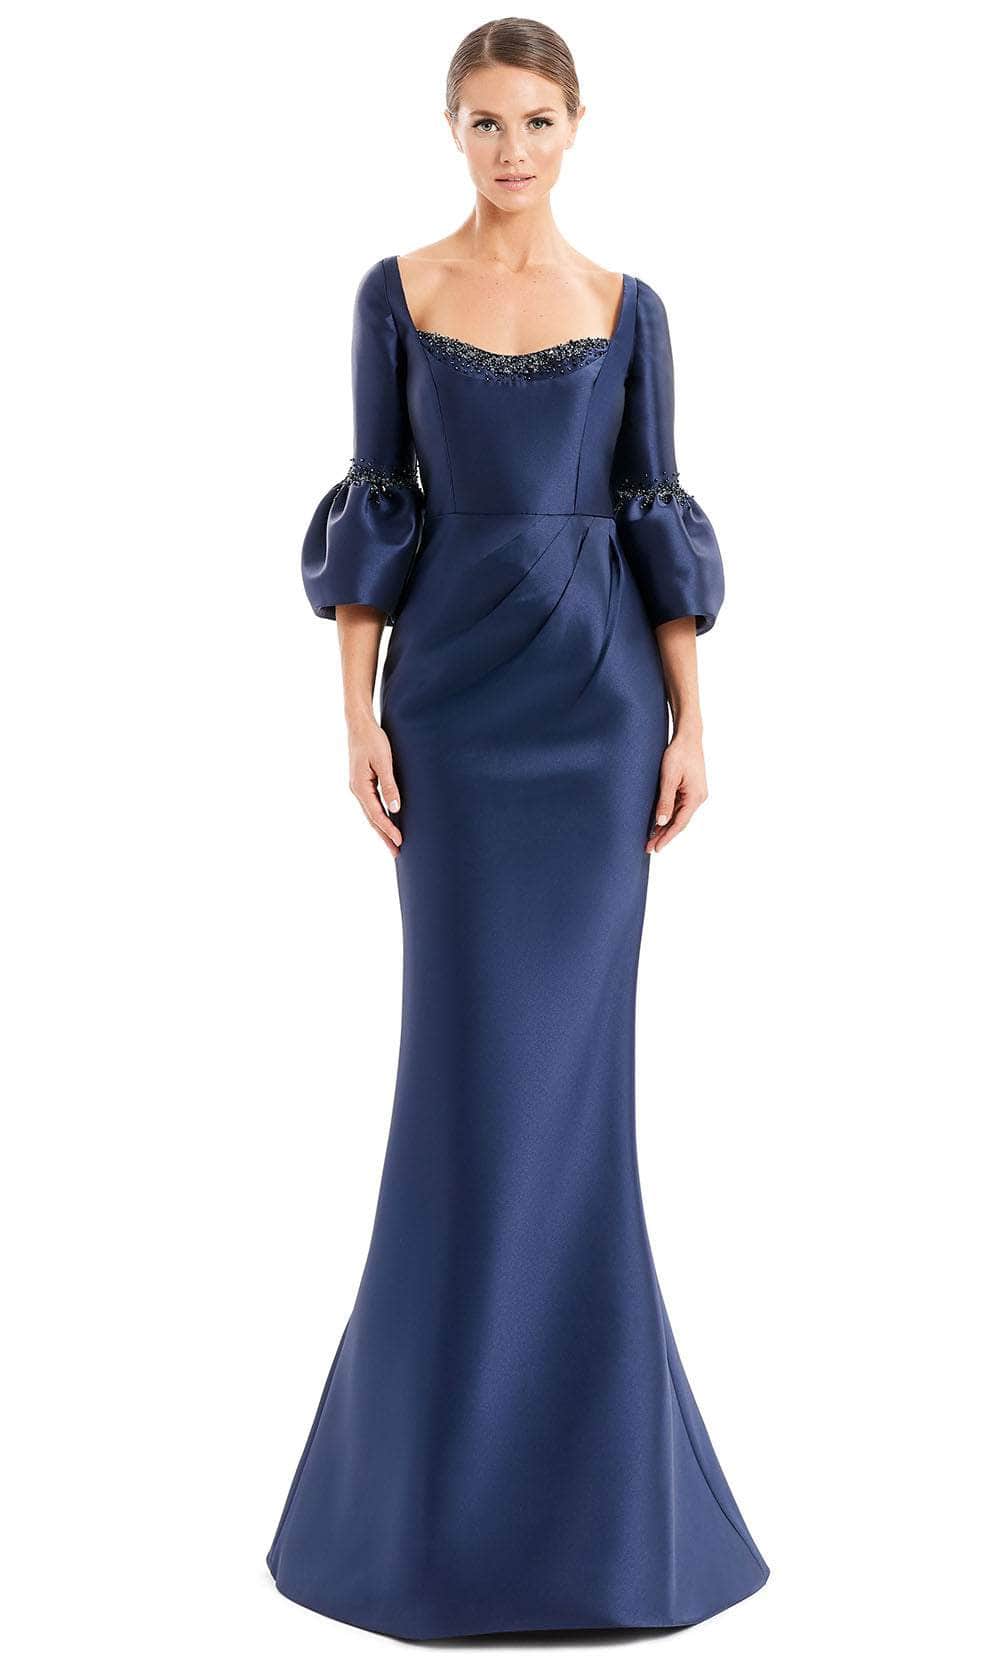 Alexander By Daymor 1659F22 - Mermaid Skirt Formal Gown Special Occasion Dress 4 / Navy